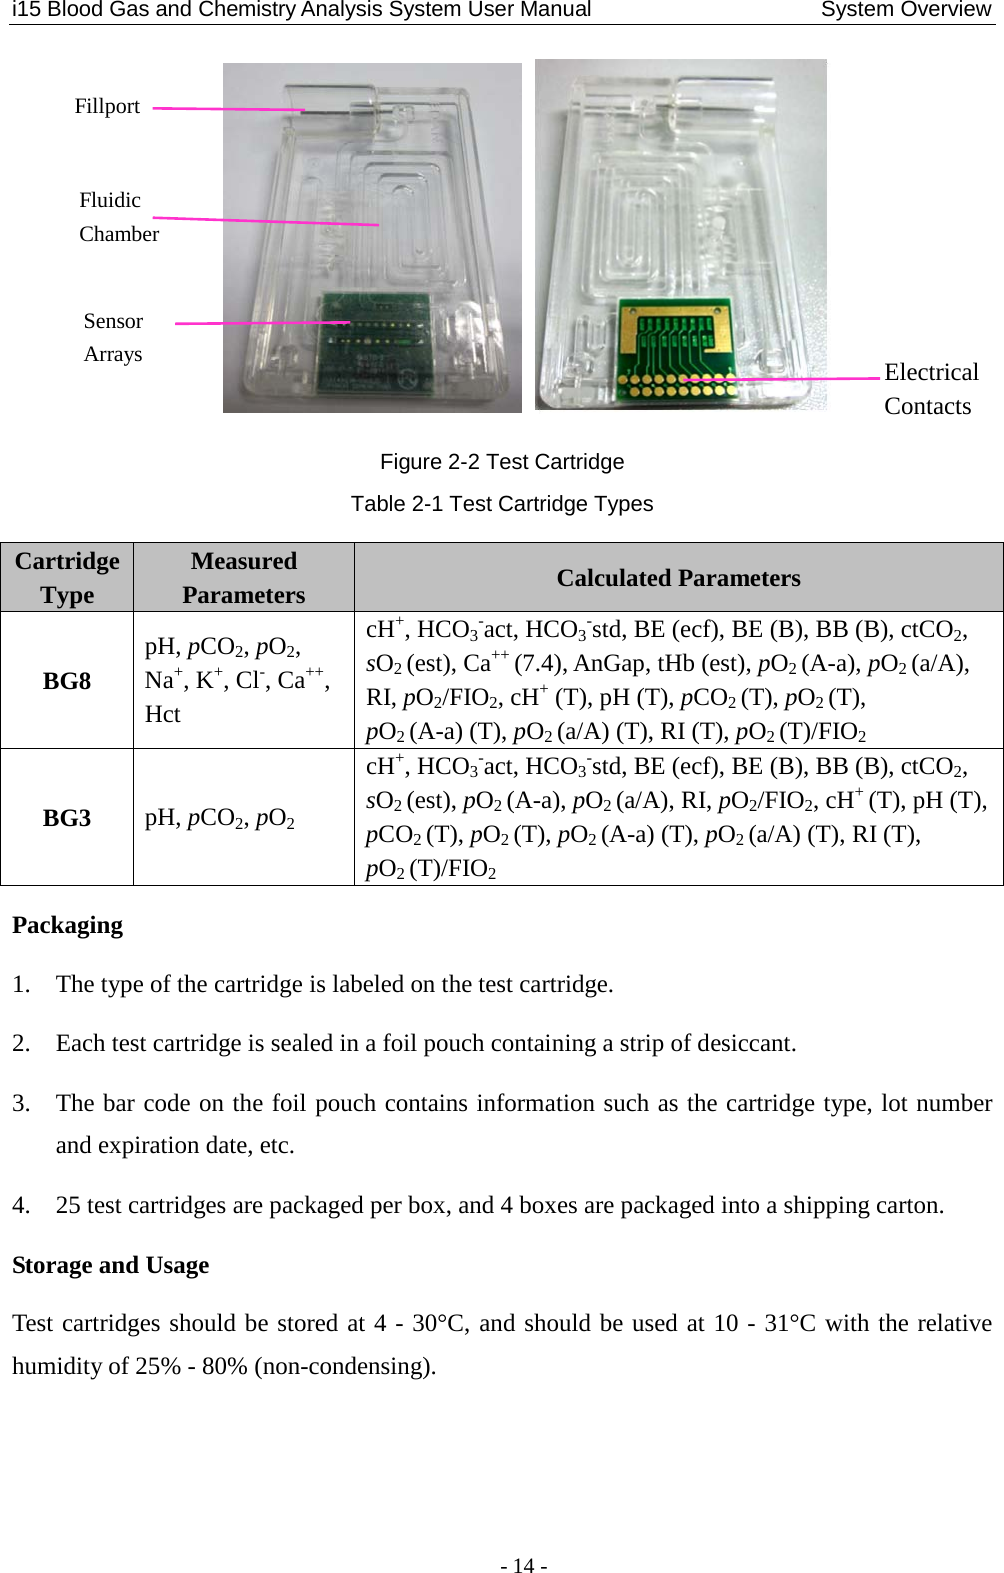 i15 Blood Gas and Chemistry Analysis System User Manual                     System Overview - 14 -    Figure 2-2 Test Cartridge Table 2-1 Test Cartridge Types Cartridge Type   Measured Parameters Calculated Parameters BG8 pH, pCO2, pO2, Na+, K+, Cl-, Ca++, Hct cH+, HCO3-act, HCO3-std, BE (ecf), BE (B), BB (B), ctCO2, sO2 (est), Ca++ (7.4), AnGap, tHb (est), pO2 (A-a), pO2 (a/A), RI, pO2/FIO2, cH+ (T), pH (T), pCO2 (T), pO2 (T),   pO2 (A-a) (T), pO2 (a/A) (T), RI (T), pO2 (T)/FIO2 BG3 pH, pCO2, pO2 cH+, HCO3-act, HCO3-std, BE (ecf), BE (B), BB (B), ctCO2, sO2 (est), pO2 (A-a), pO2 (a/A), RI, pO2/FIO2, cH+ (T), pH (T), pCO2 (T), pO2 (T), pO2 (A-a) (T), pO2 (a/A) (T), RI (T),   pO2 (T)/FIO2 Packaging 1. The type of the cartridge is labeled on the test cartridge. 2. Each test cartridge is sealed in a foil pouch containing a strip of desiccant. 3. The bar code on the foil pouch contains information such as the cartridge type, lot number and expiration date, etc. 4. 25 test cartridges are packaged per box, and 4 boxes are packaged into a shipping carton. Storage and Usage Test cartridges should be stored at 4 - 30°C, and should be used at 10 - 31°C with the relative humidity of 25% - 80% (non-condensing).    Sensor Arrays Fluidic Chamber Fillport Electrical Contacts 